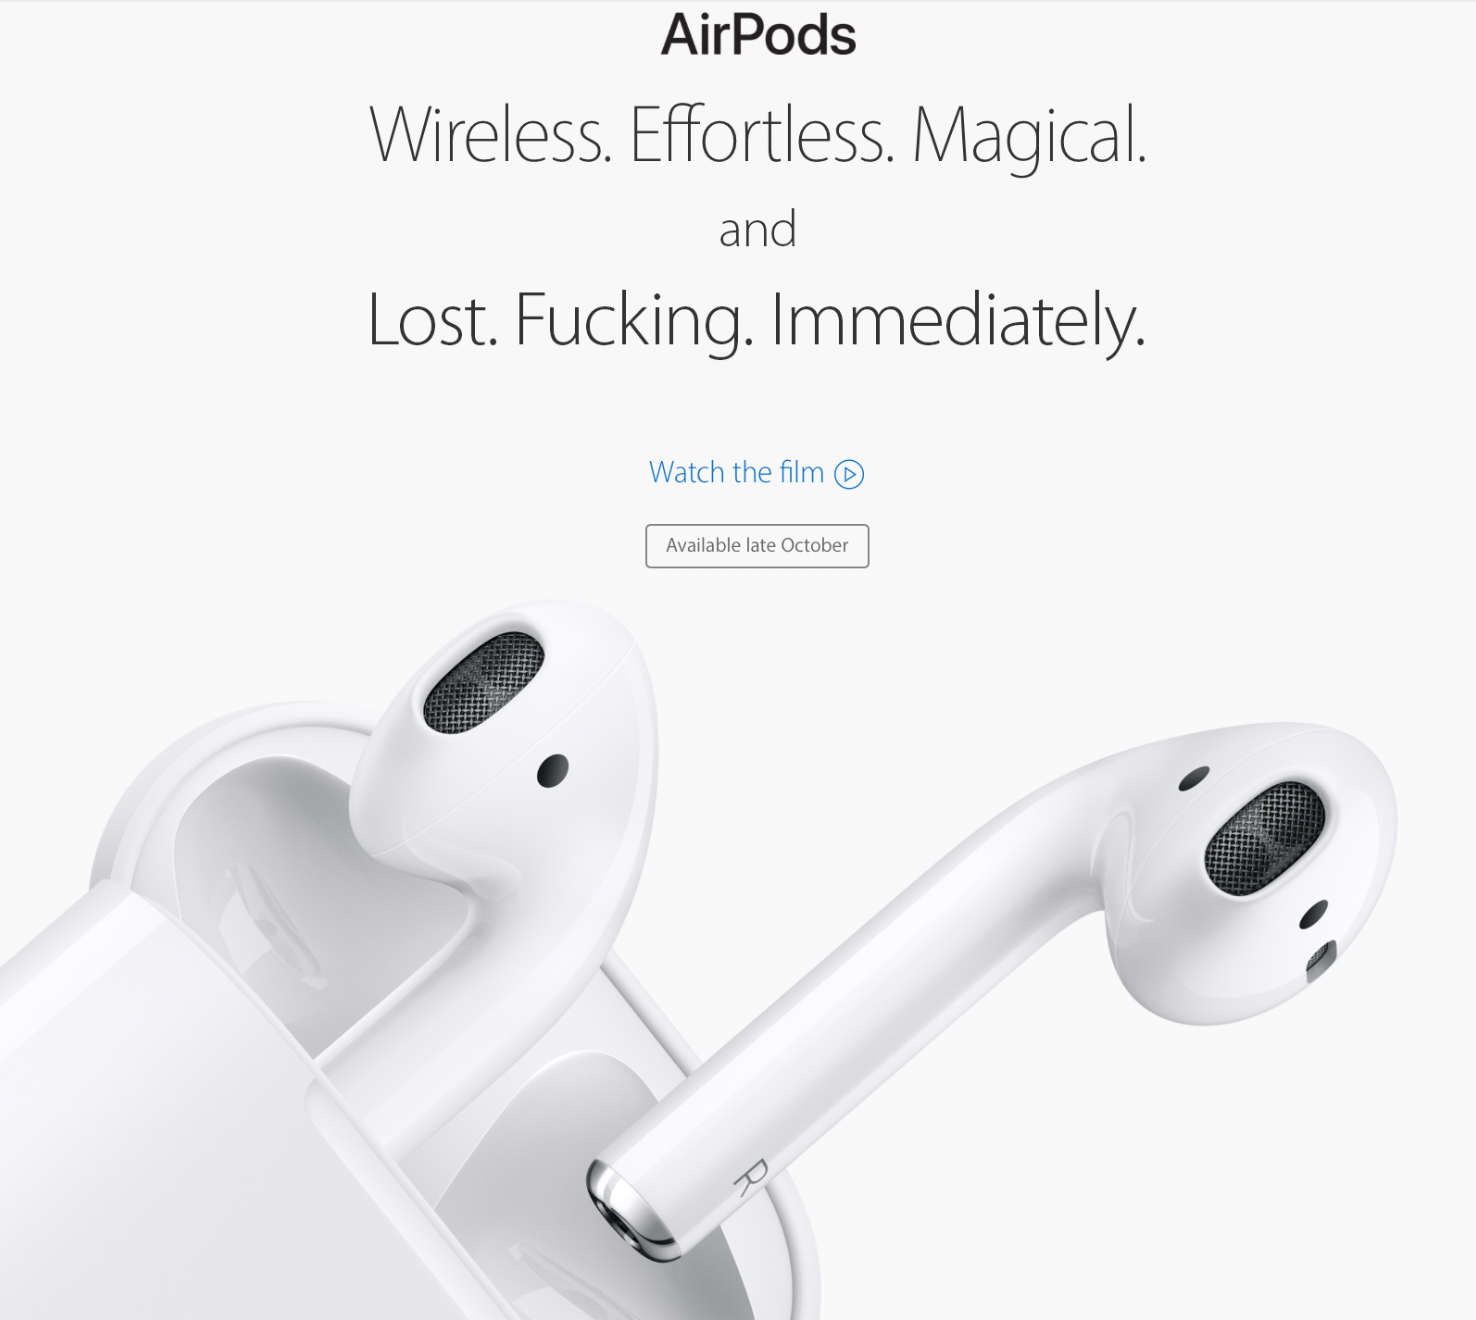 Apples new Air Pods. Wireless. Effortless. Magical. and...